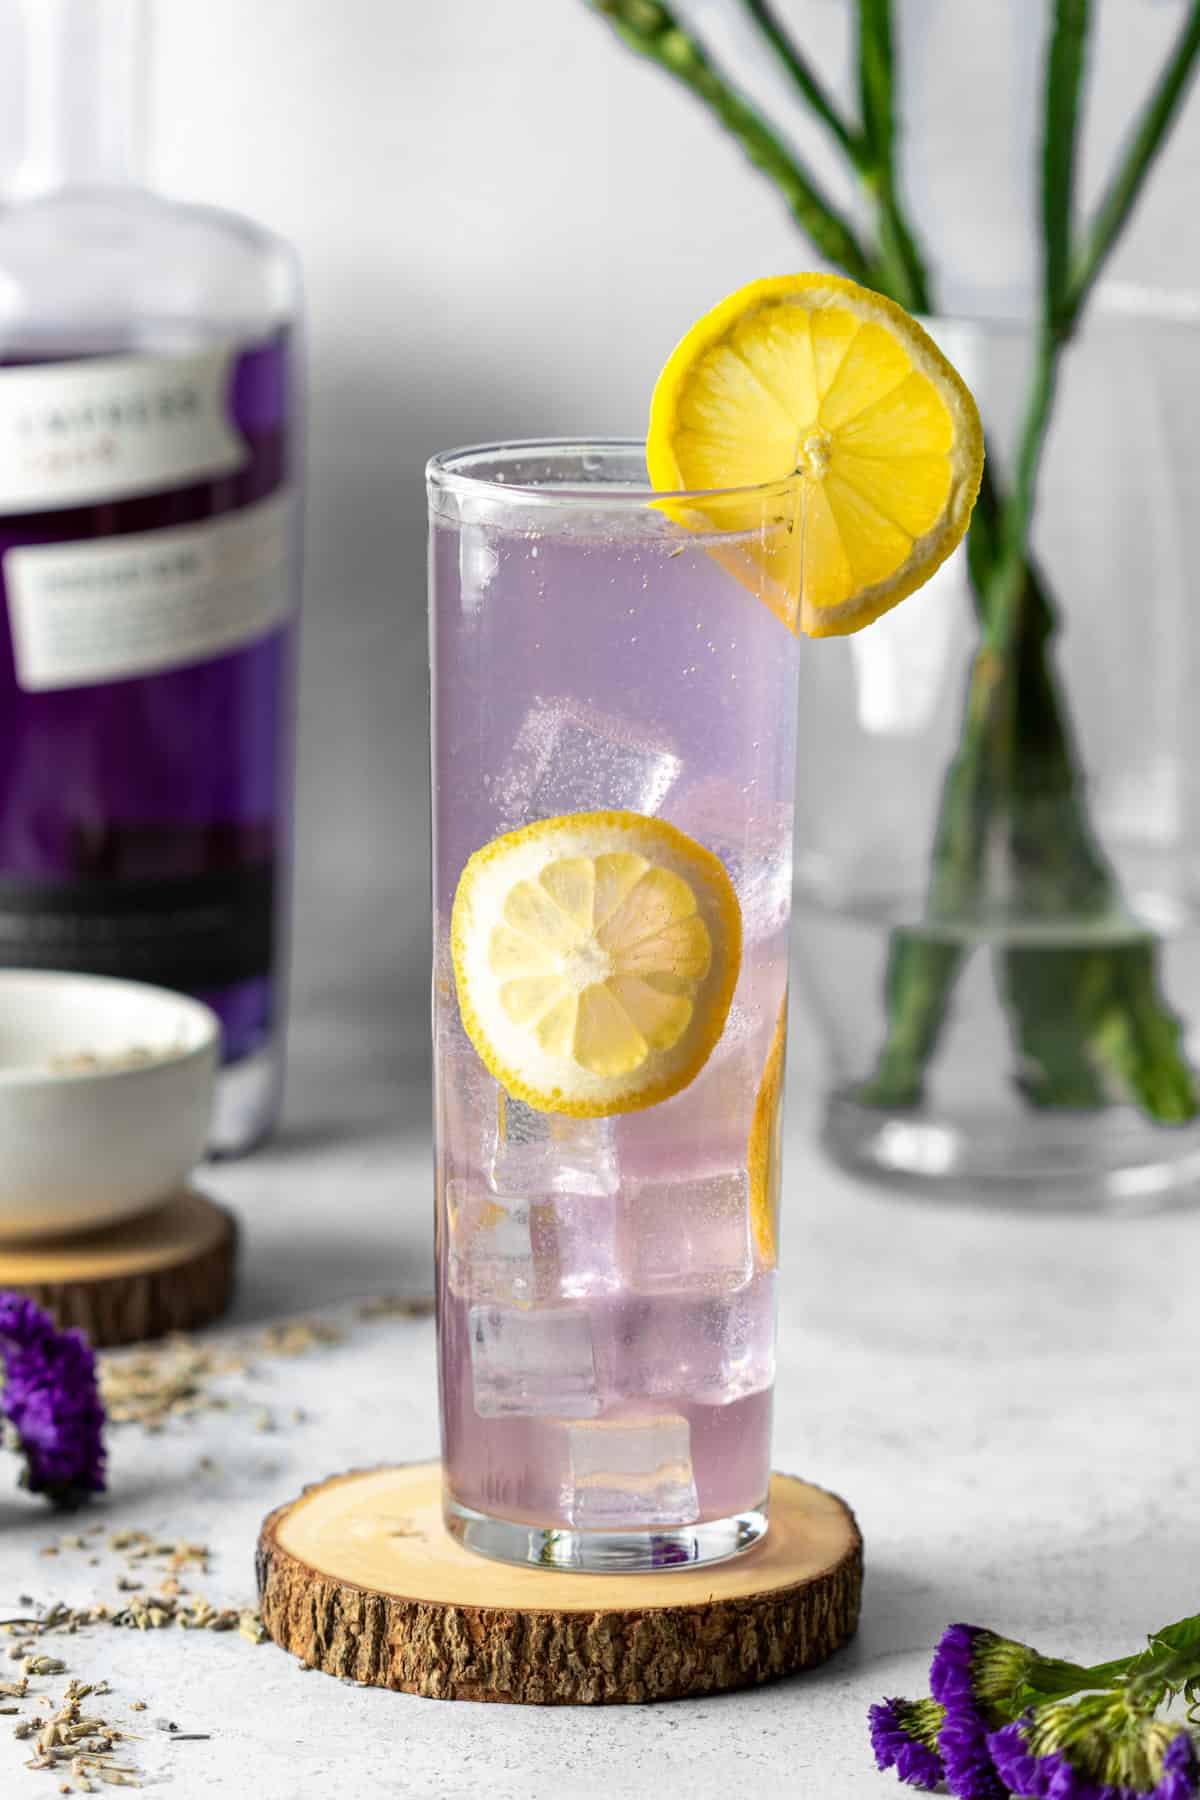 A tall glass on a wooden coaster with a purple collins drink garnished with lemon wheels and flowers.